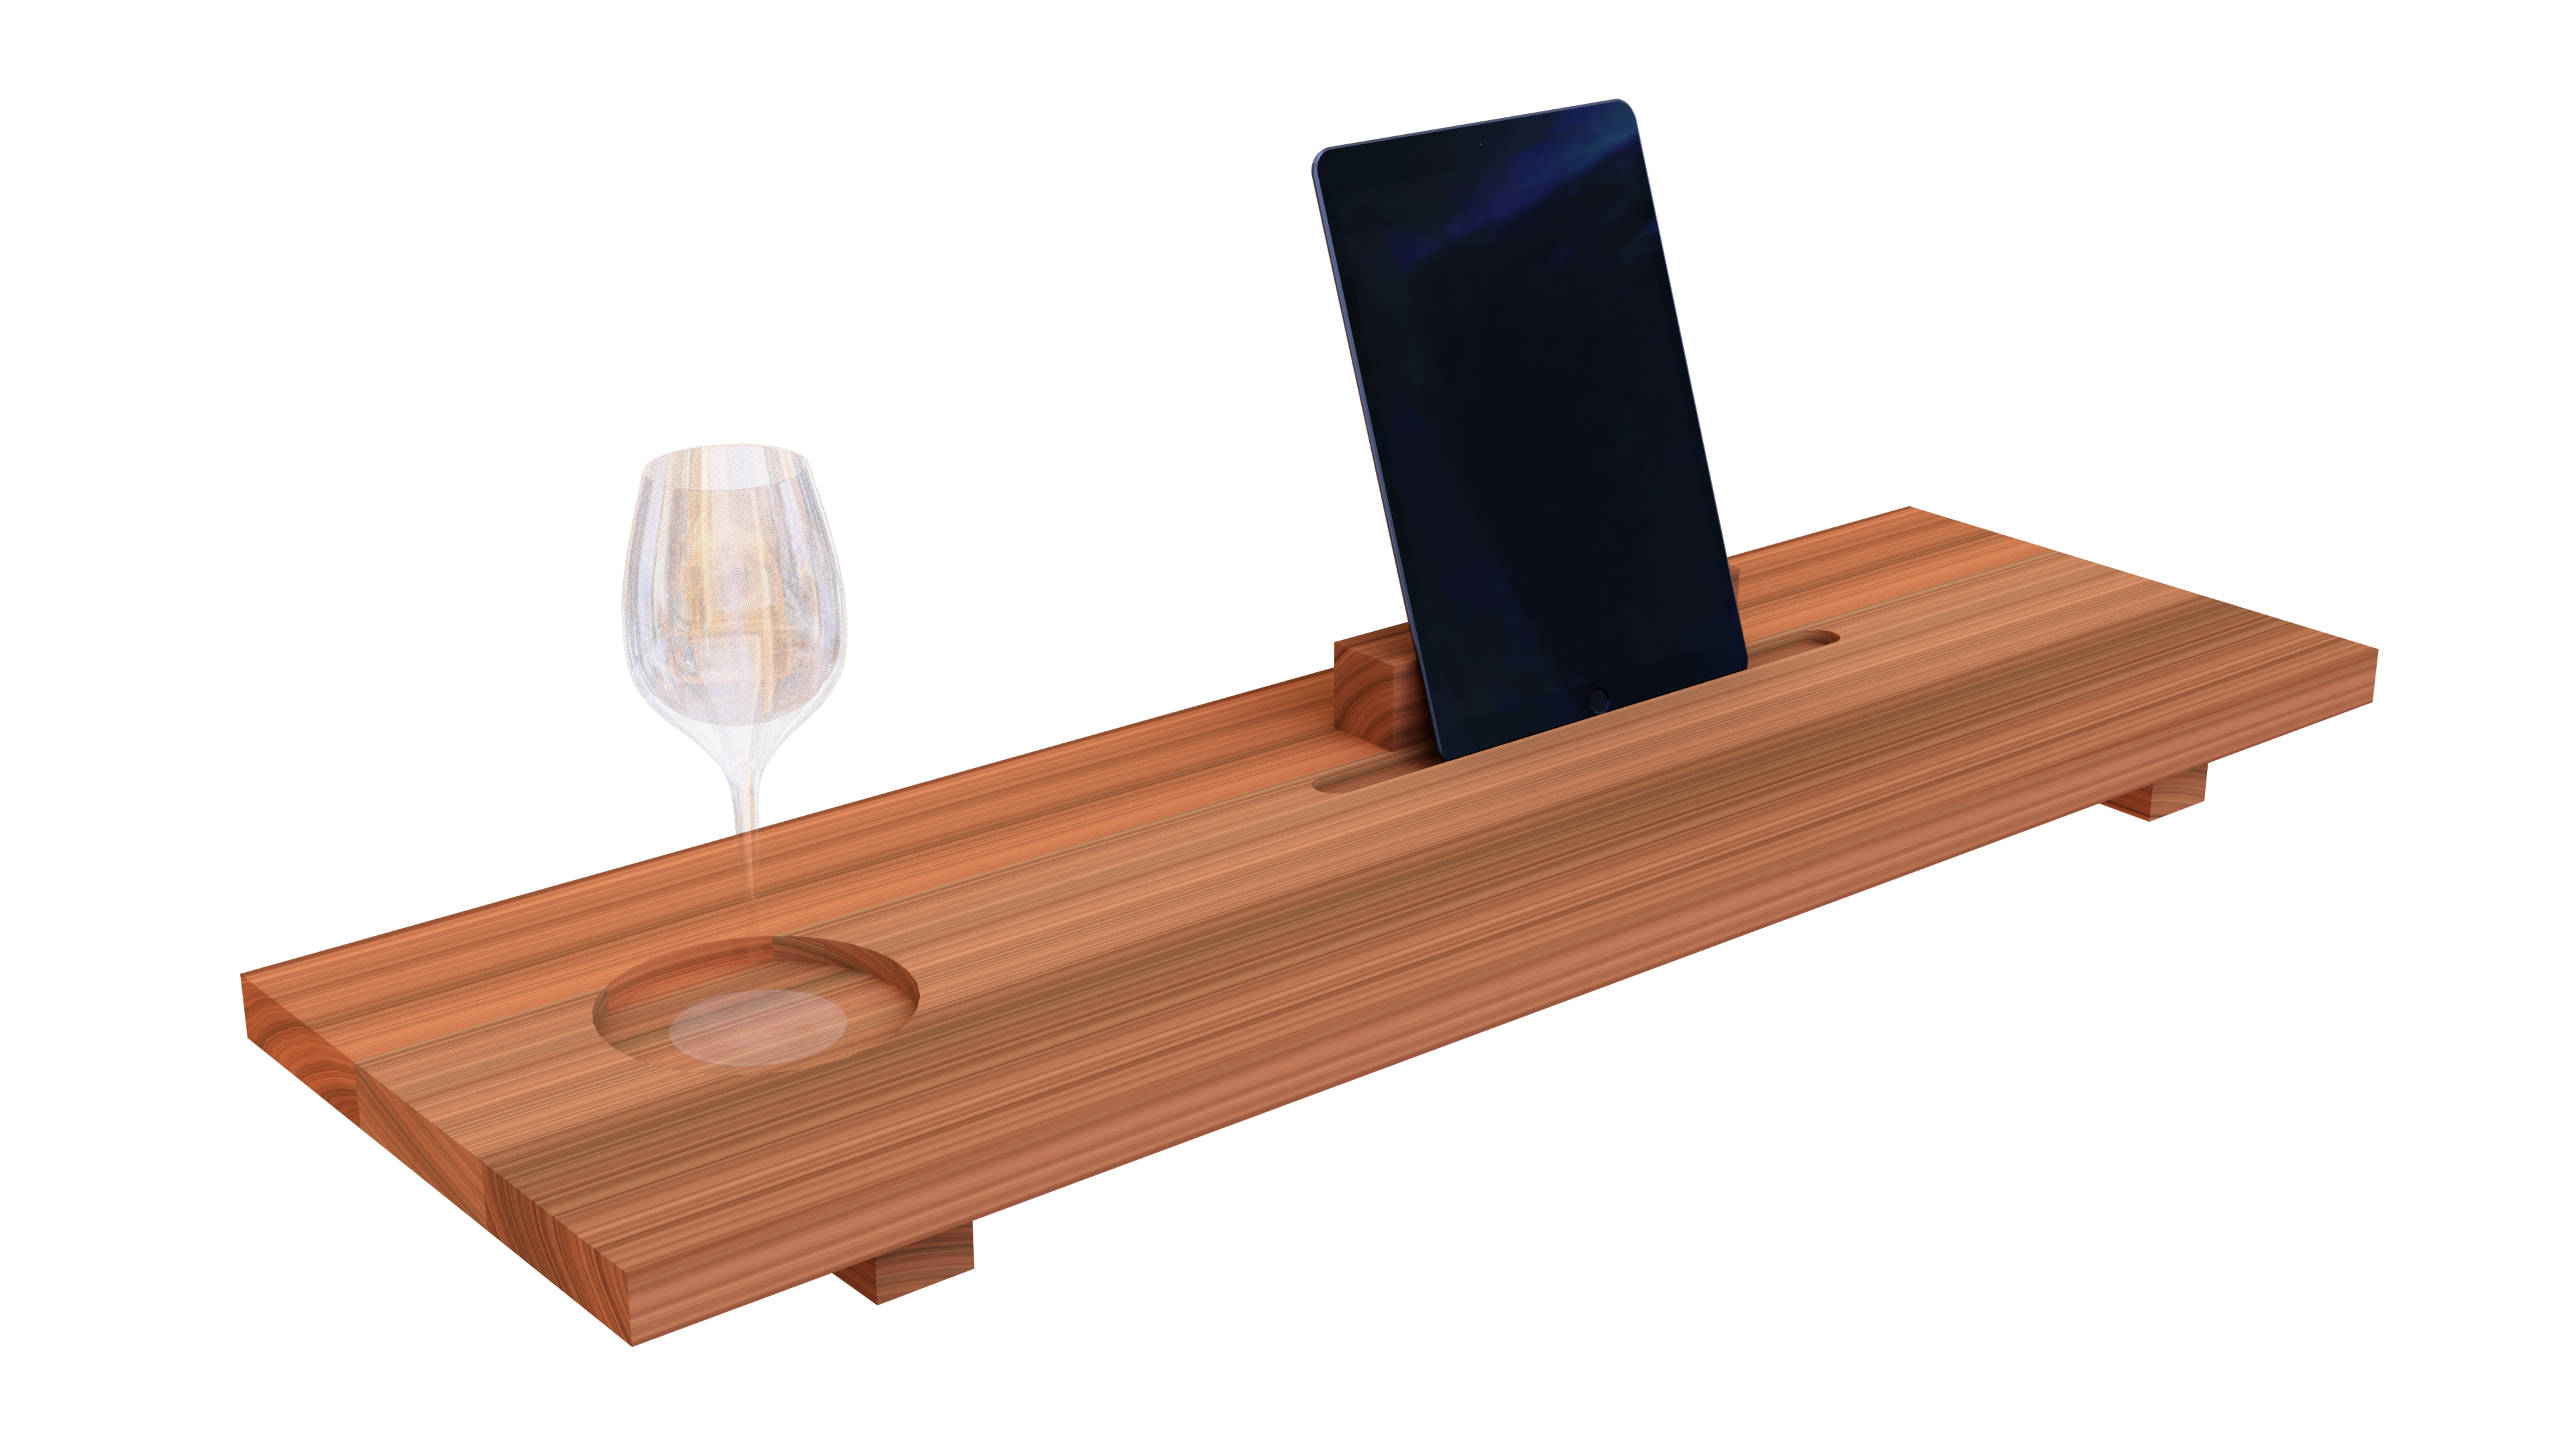 Cedar Ofuro Tray with wine glass and tablet